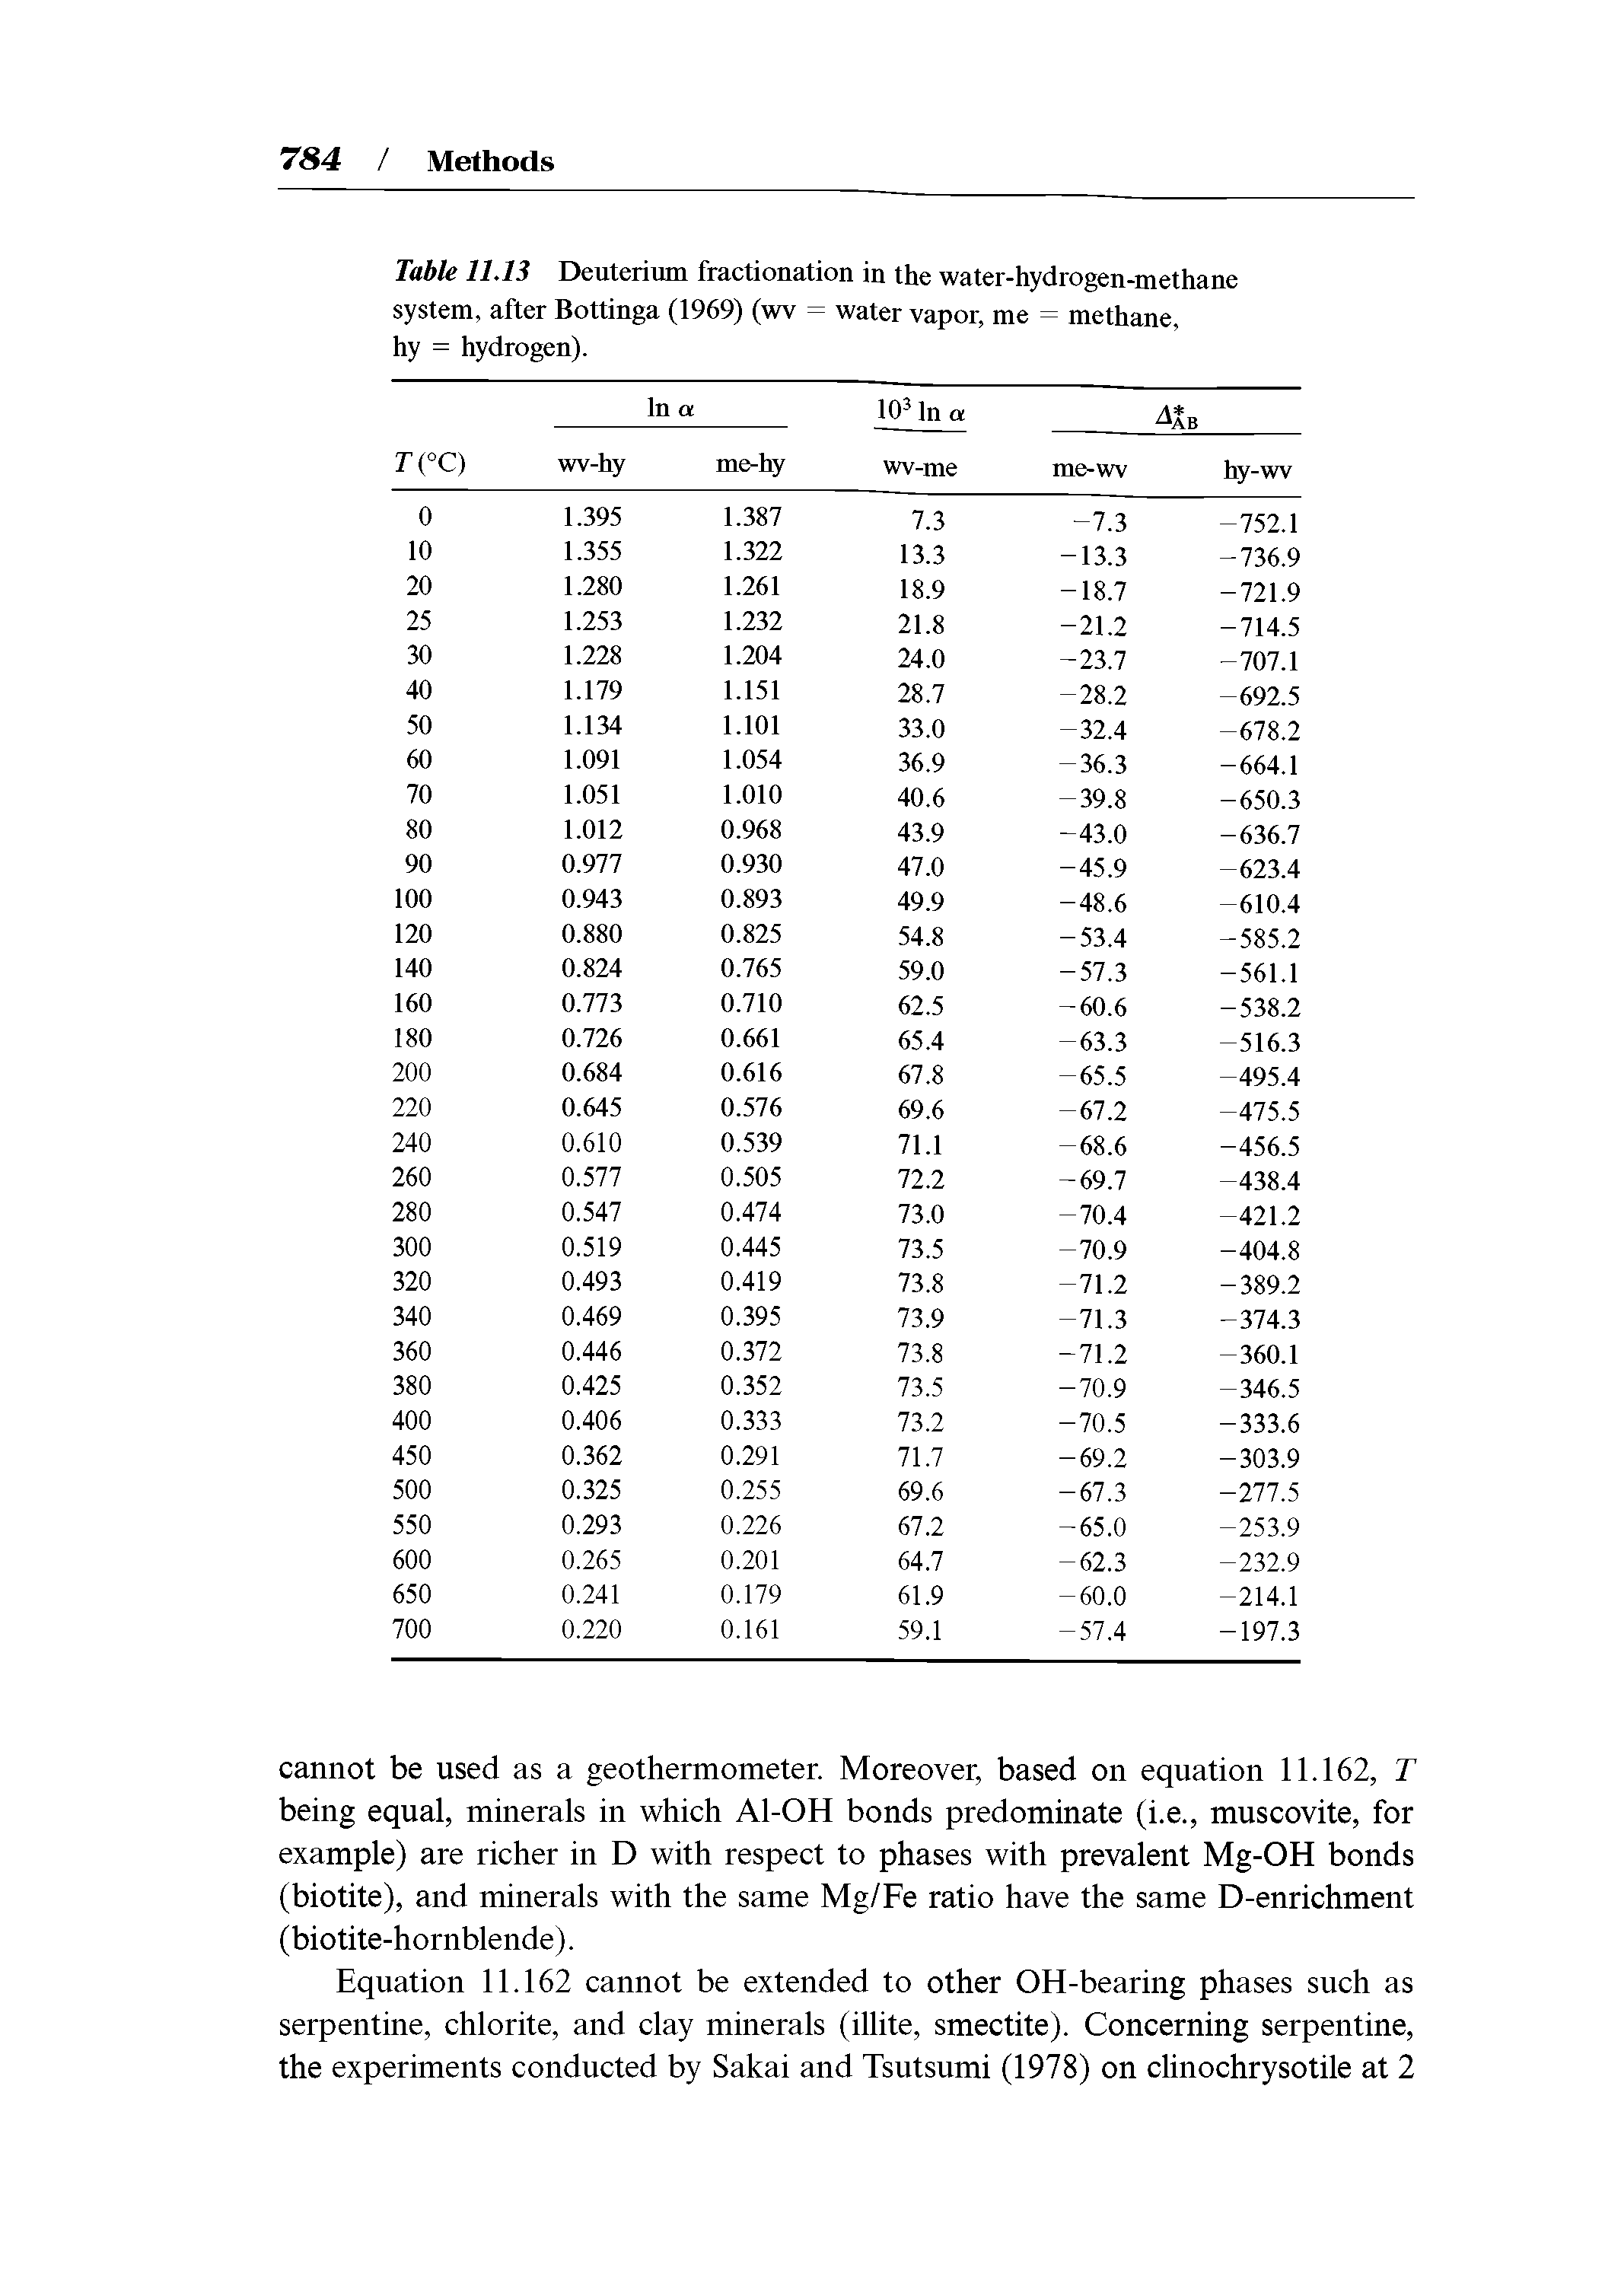 Table 11.13 Deuterium fractionation in the water-hydrogen-methane system, after Bottinga (1969) (wv = water vapor, me = methane, hy = hydrogen).